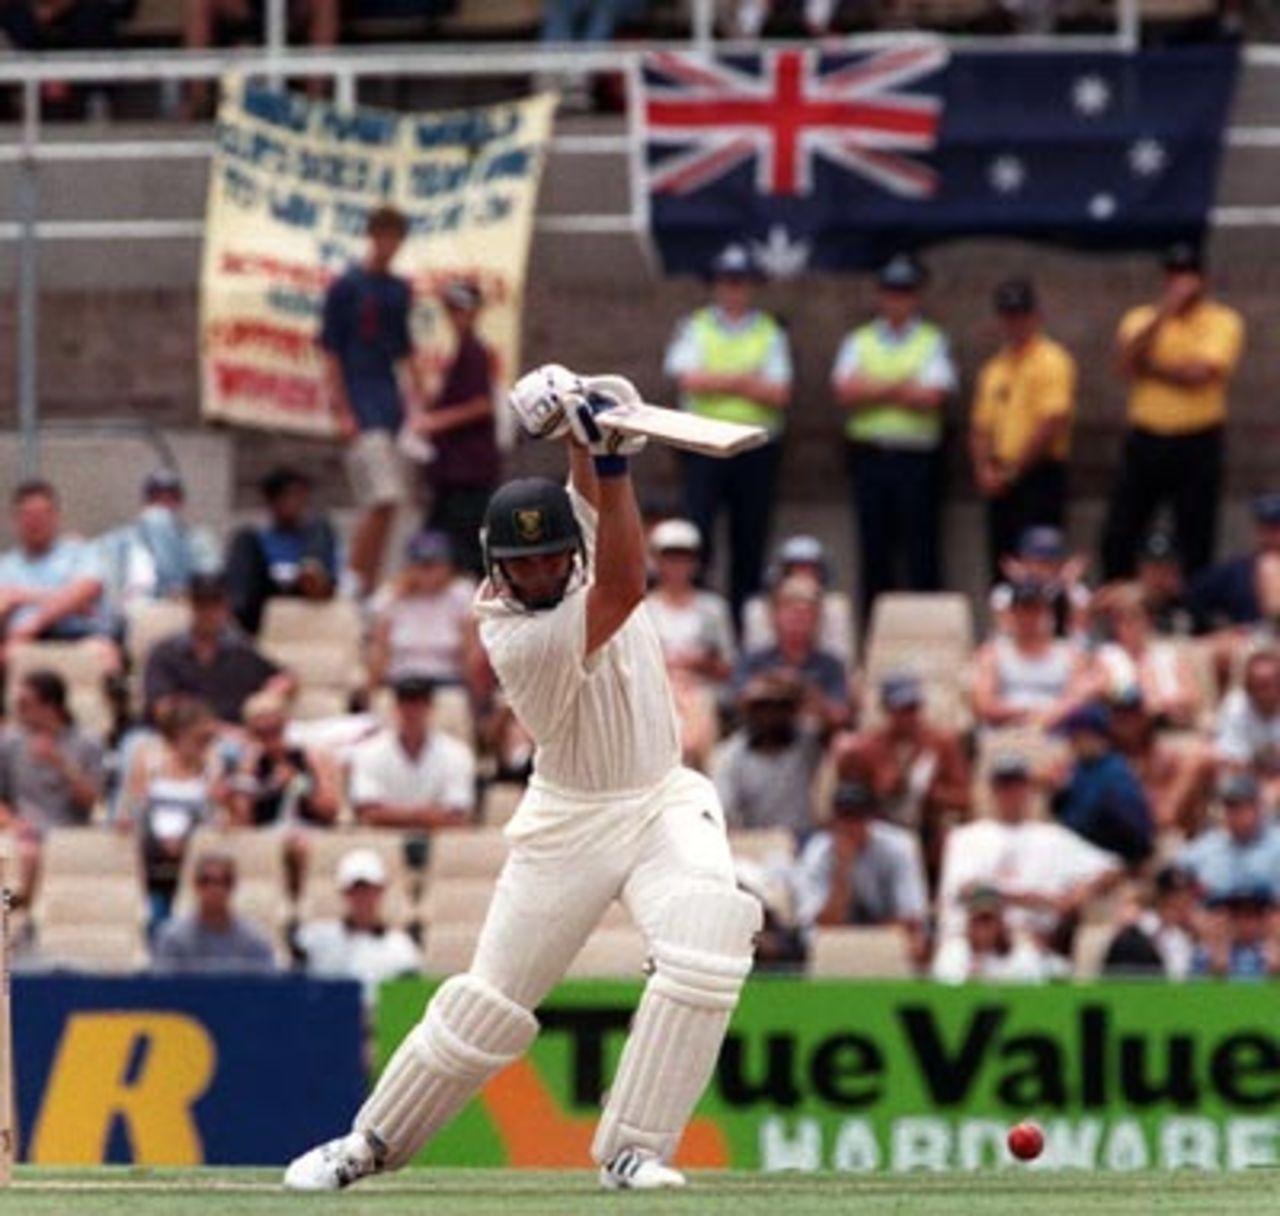 Jacques Kallis drives under the Australian flag....Australia v South Africa, 2nd Test Day 4 at the SCG, Monday January 5th 1998